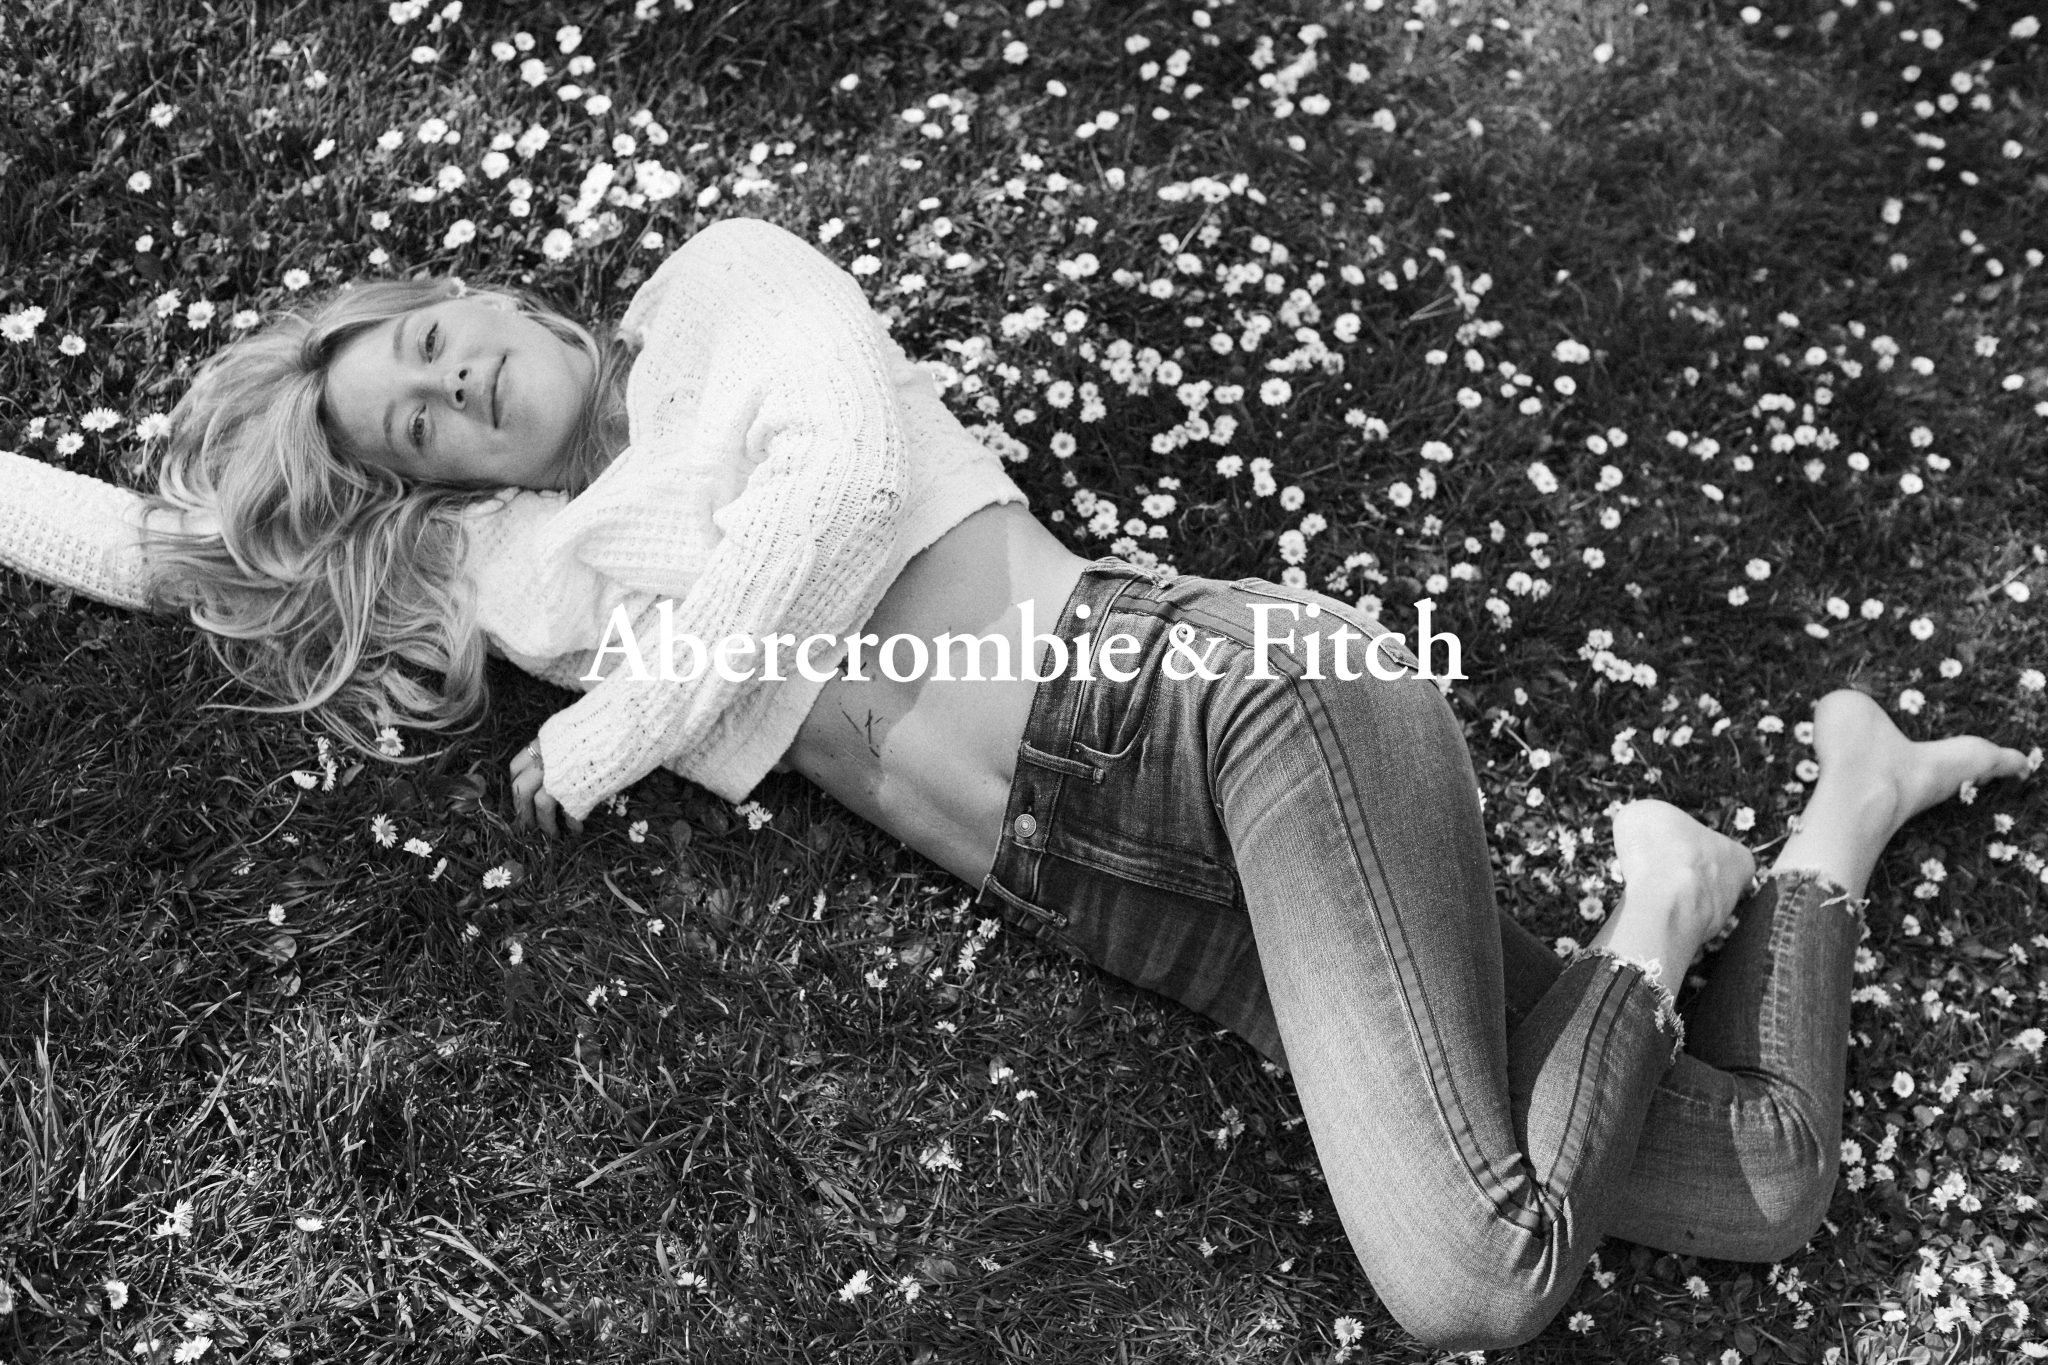  | Abercrombie & Fitch | 5